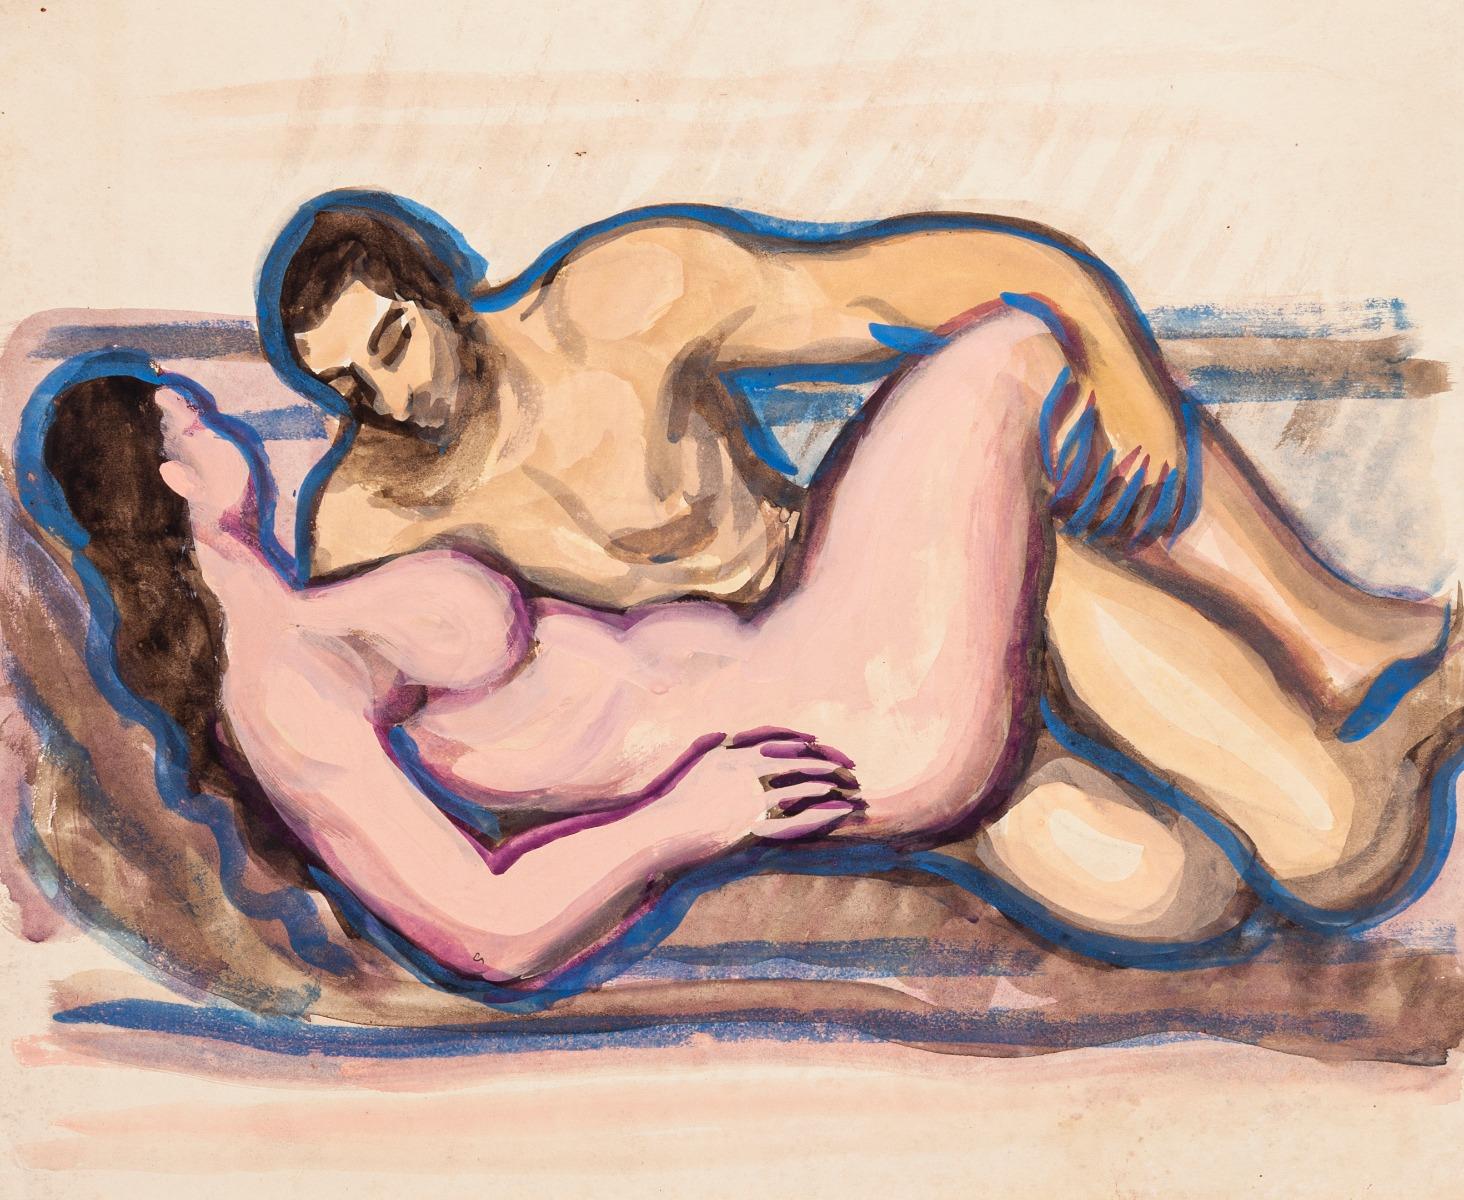 Unknown Nude - Lovers - Original Drawing in Mixed Media - 1940 ca.